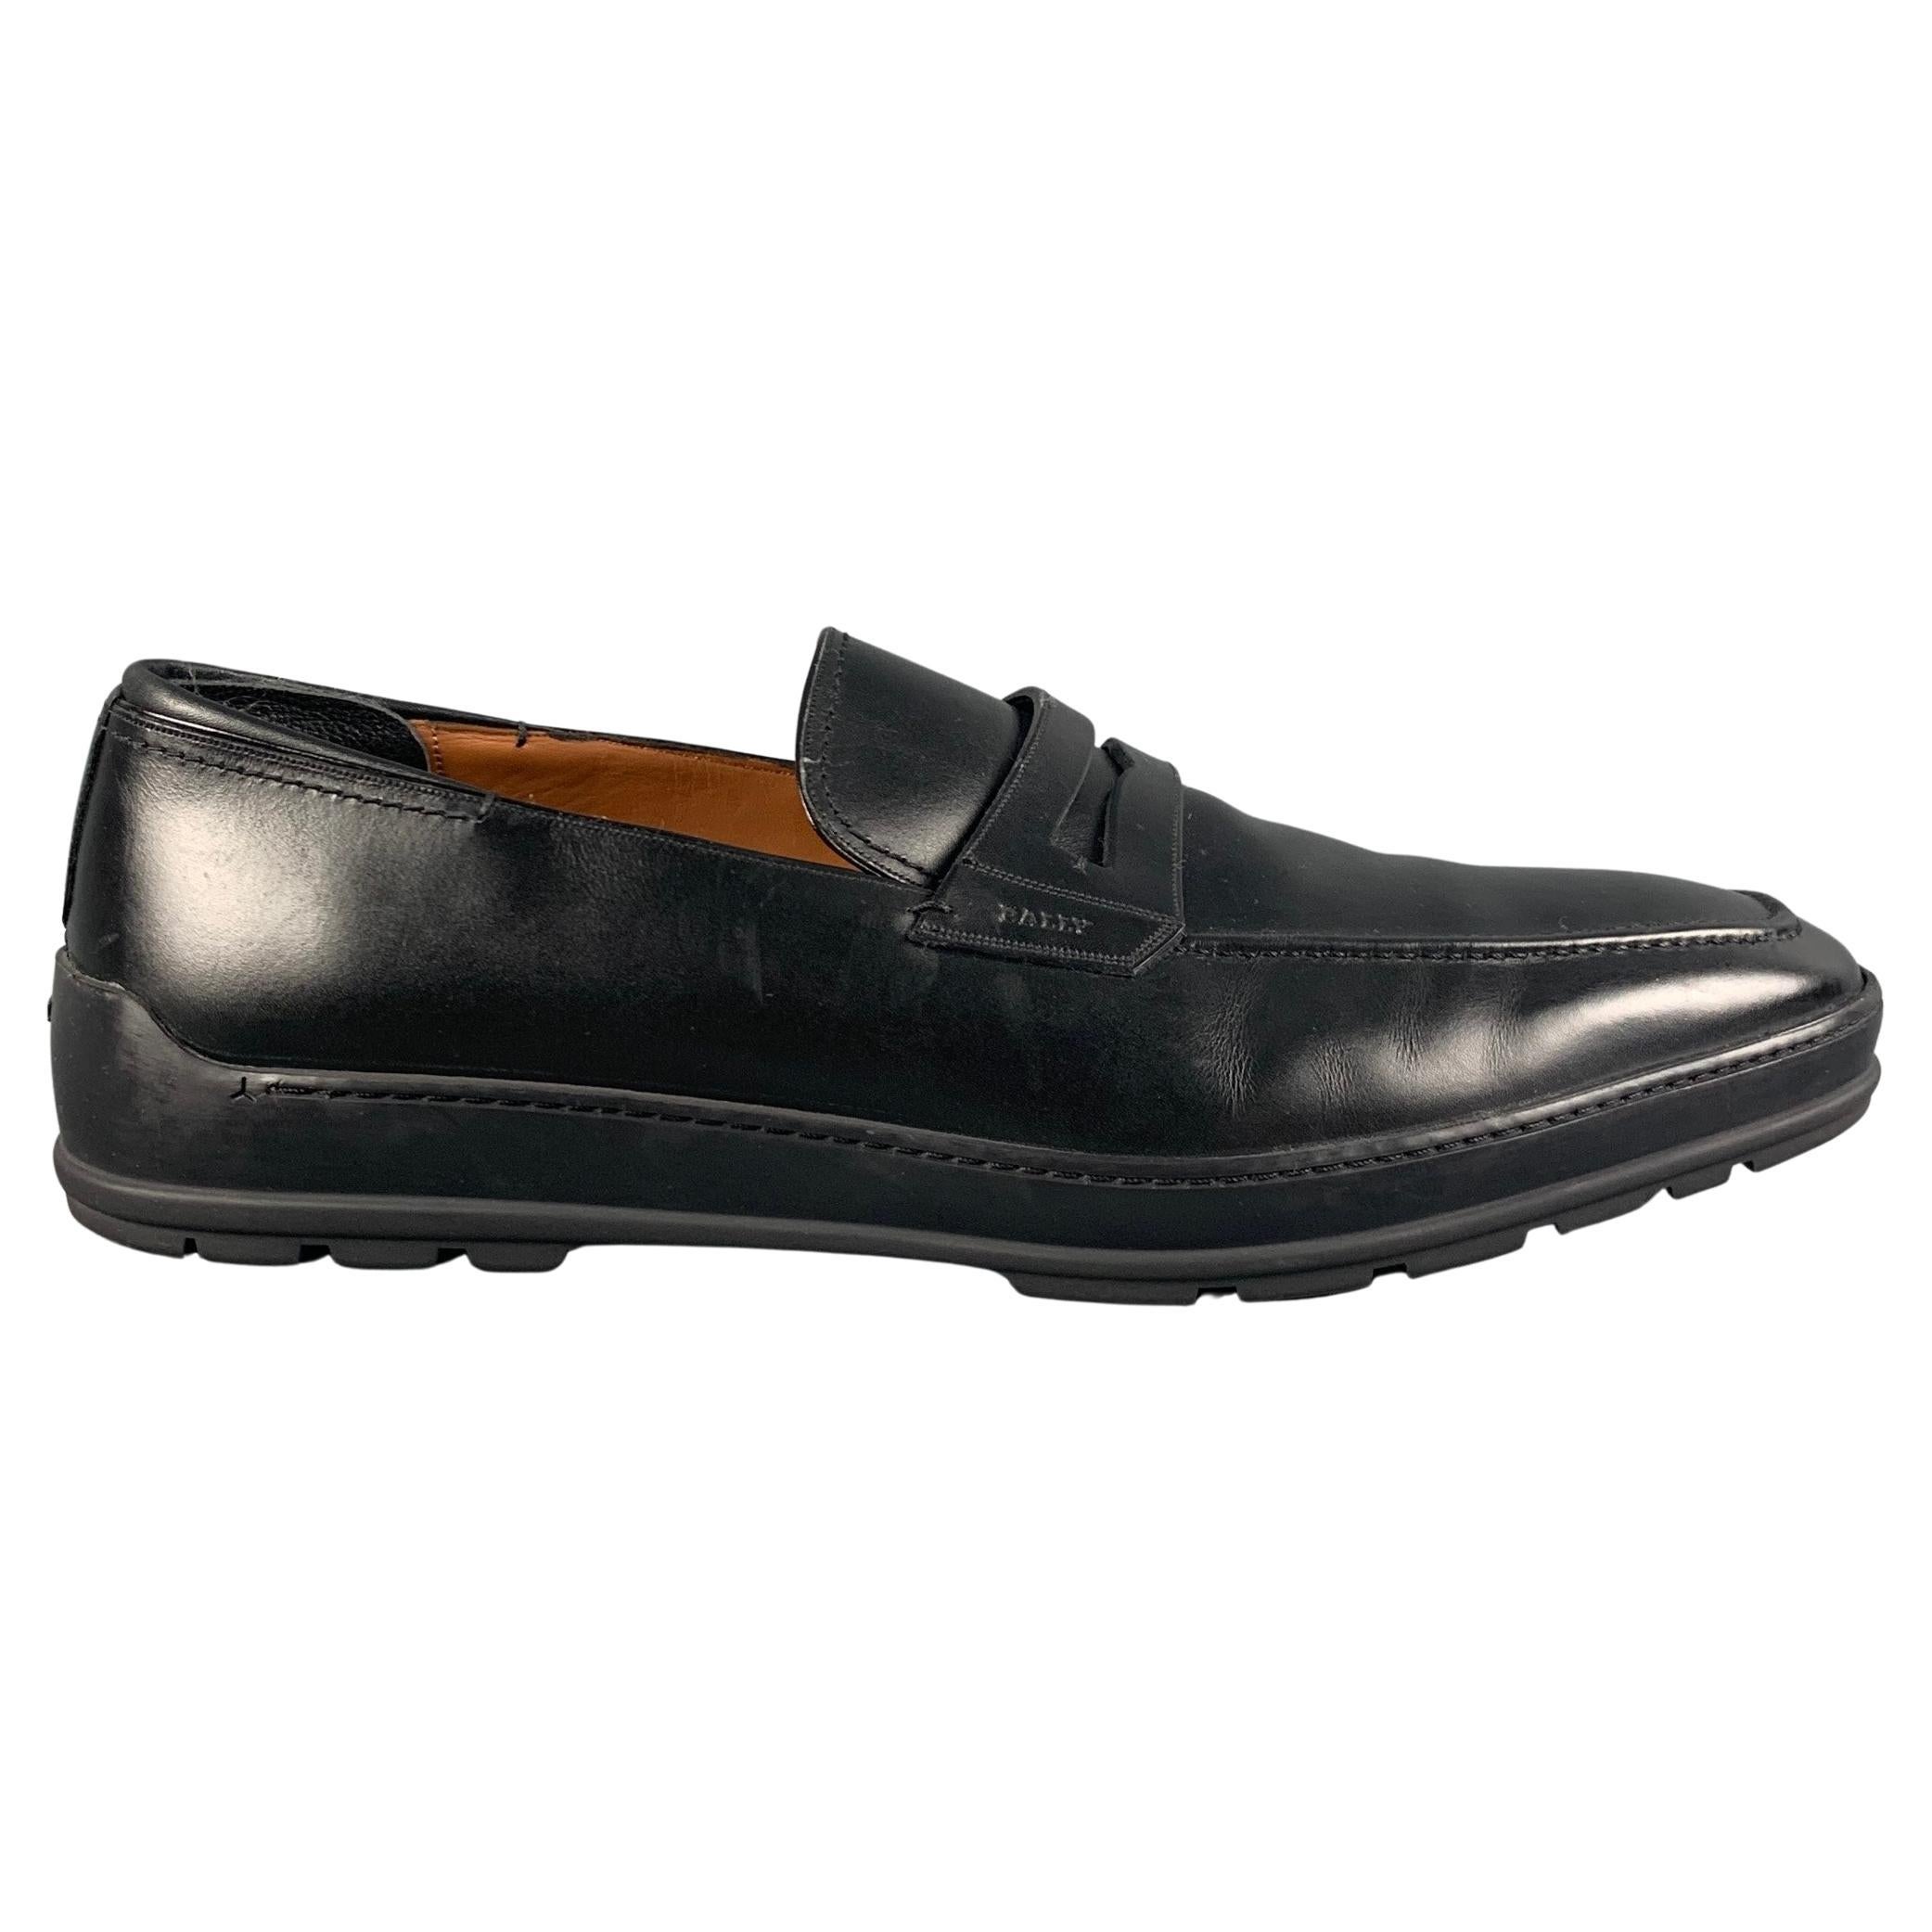 BALLY Size 10 Black Leather Penny Relon Loafers